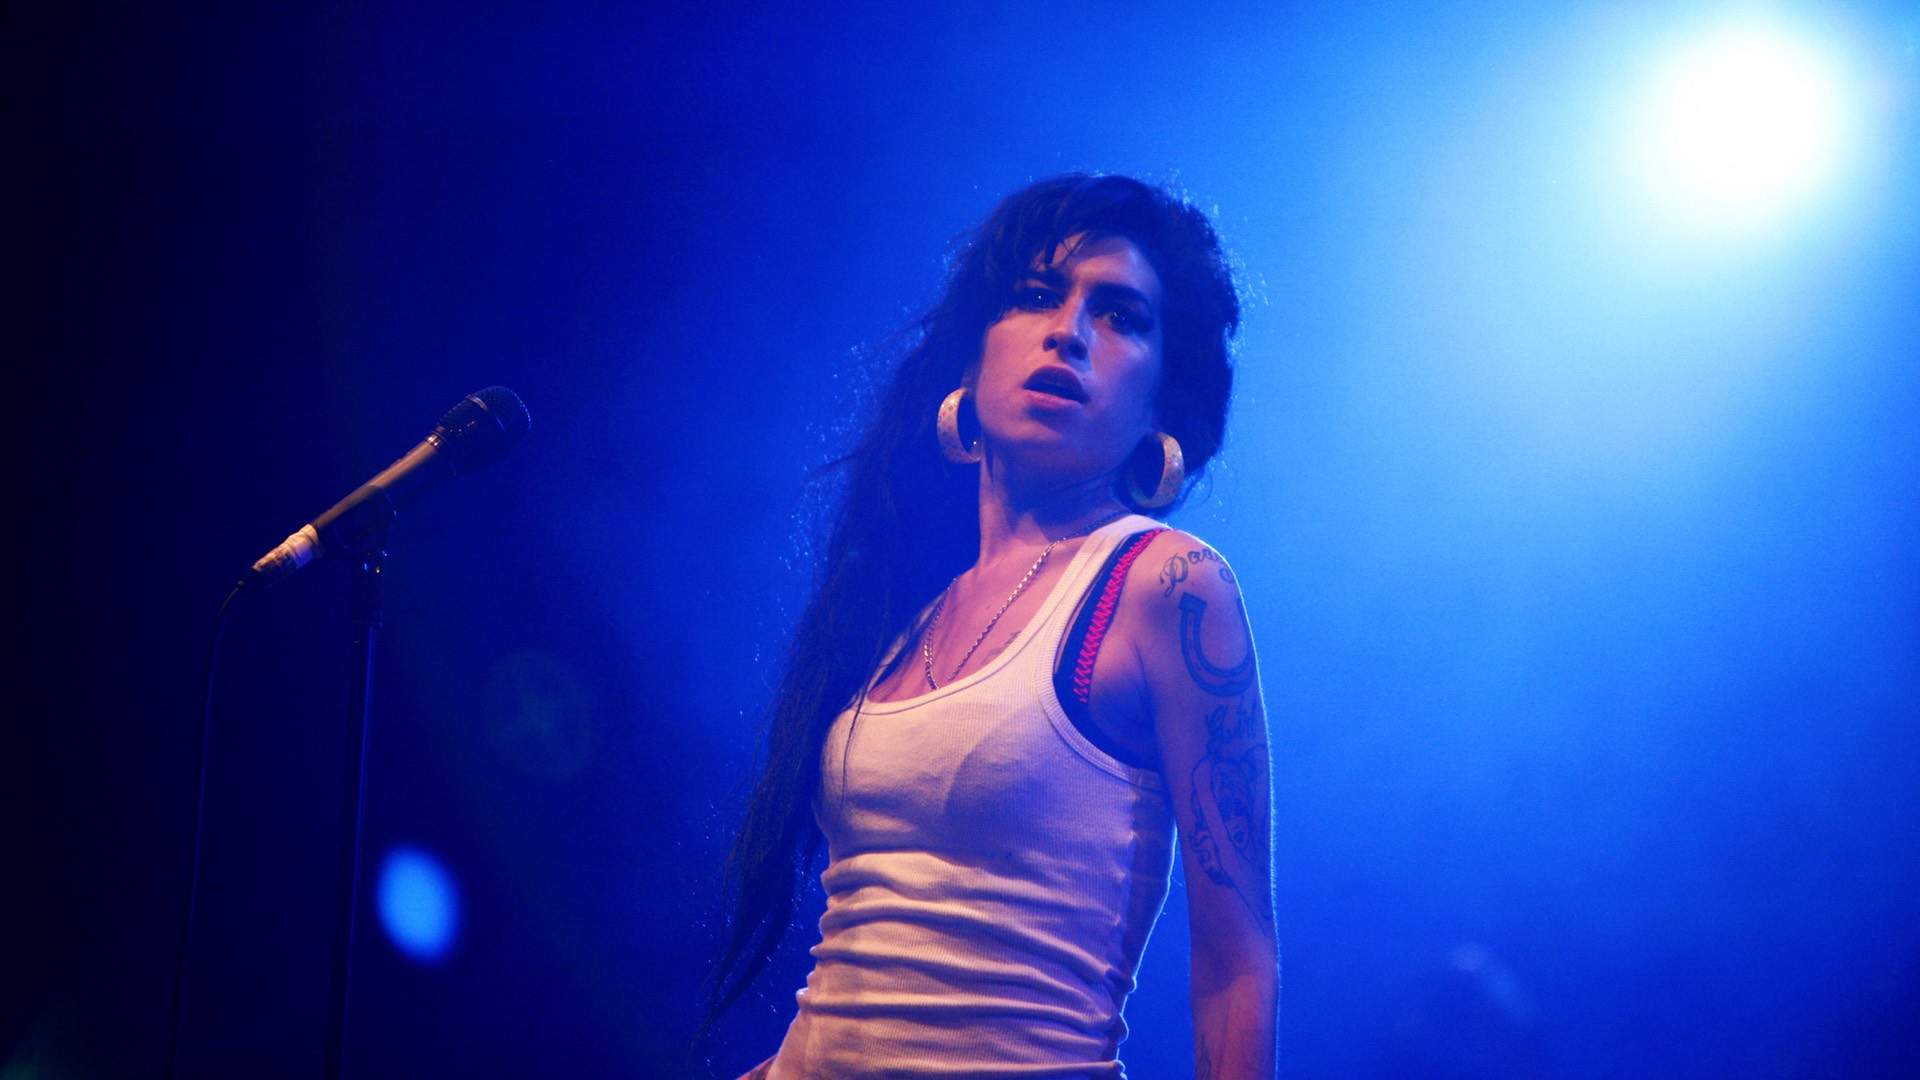 An Amy Winehouse Hologram Is Set to Tour Worldwide in 2019